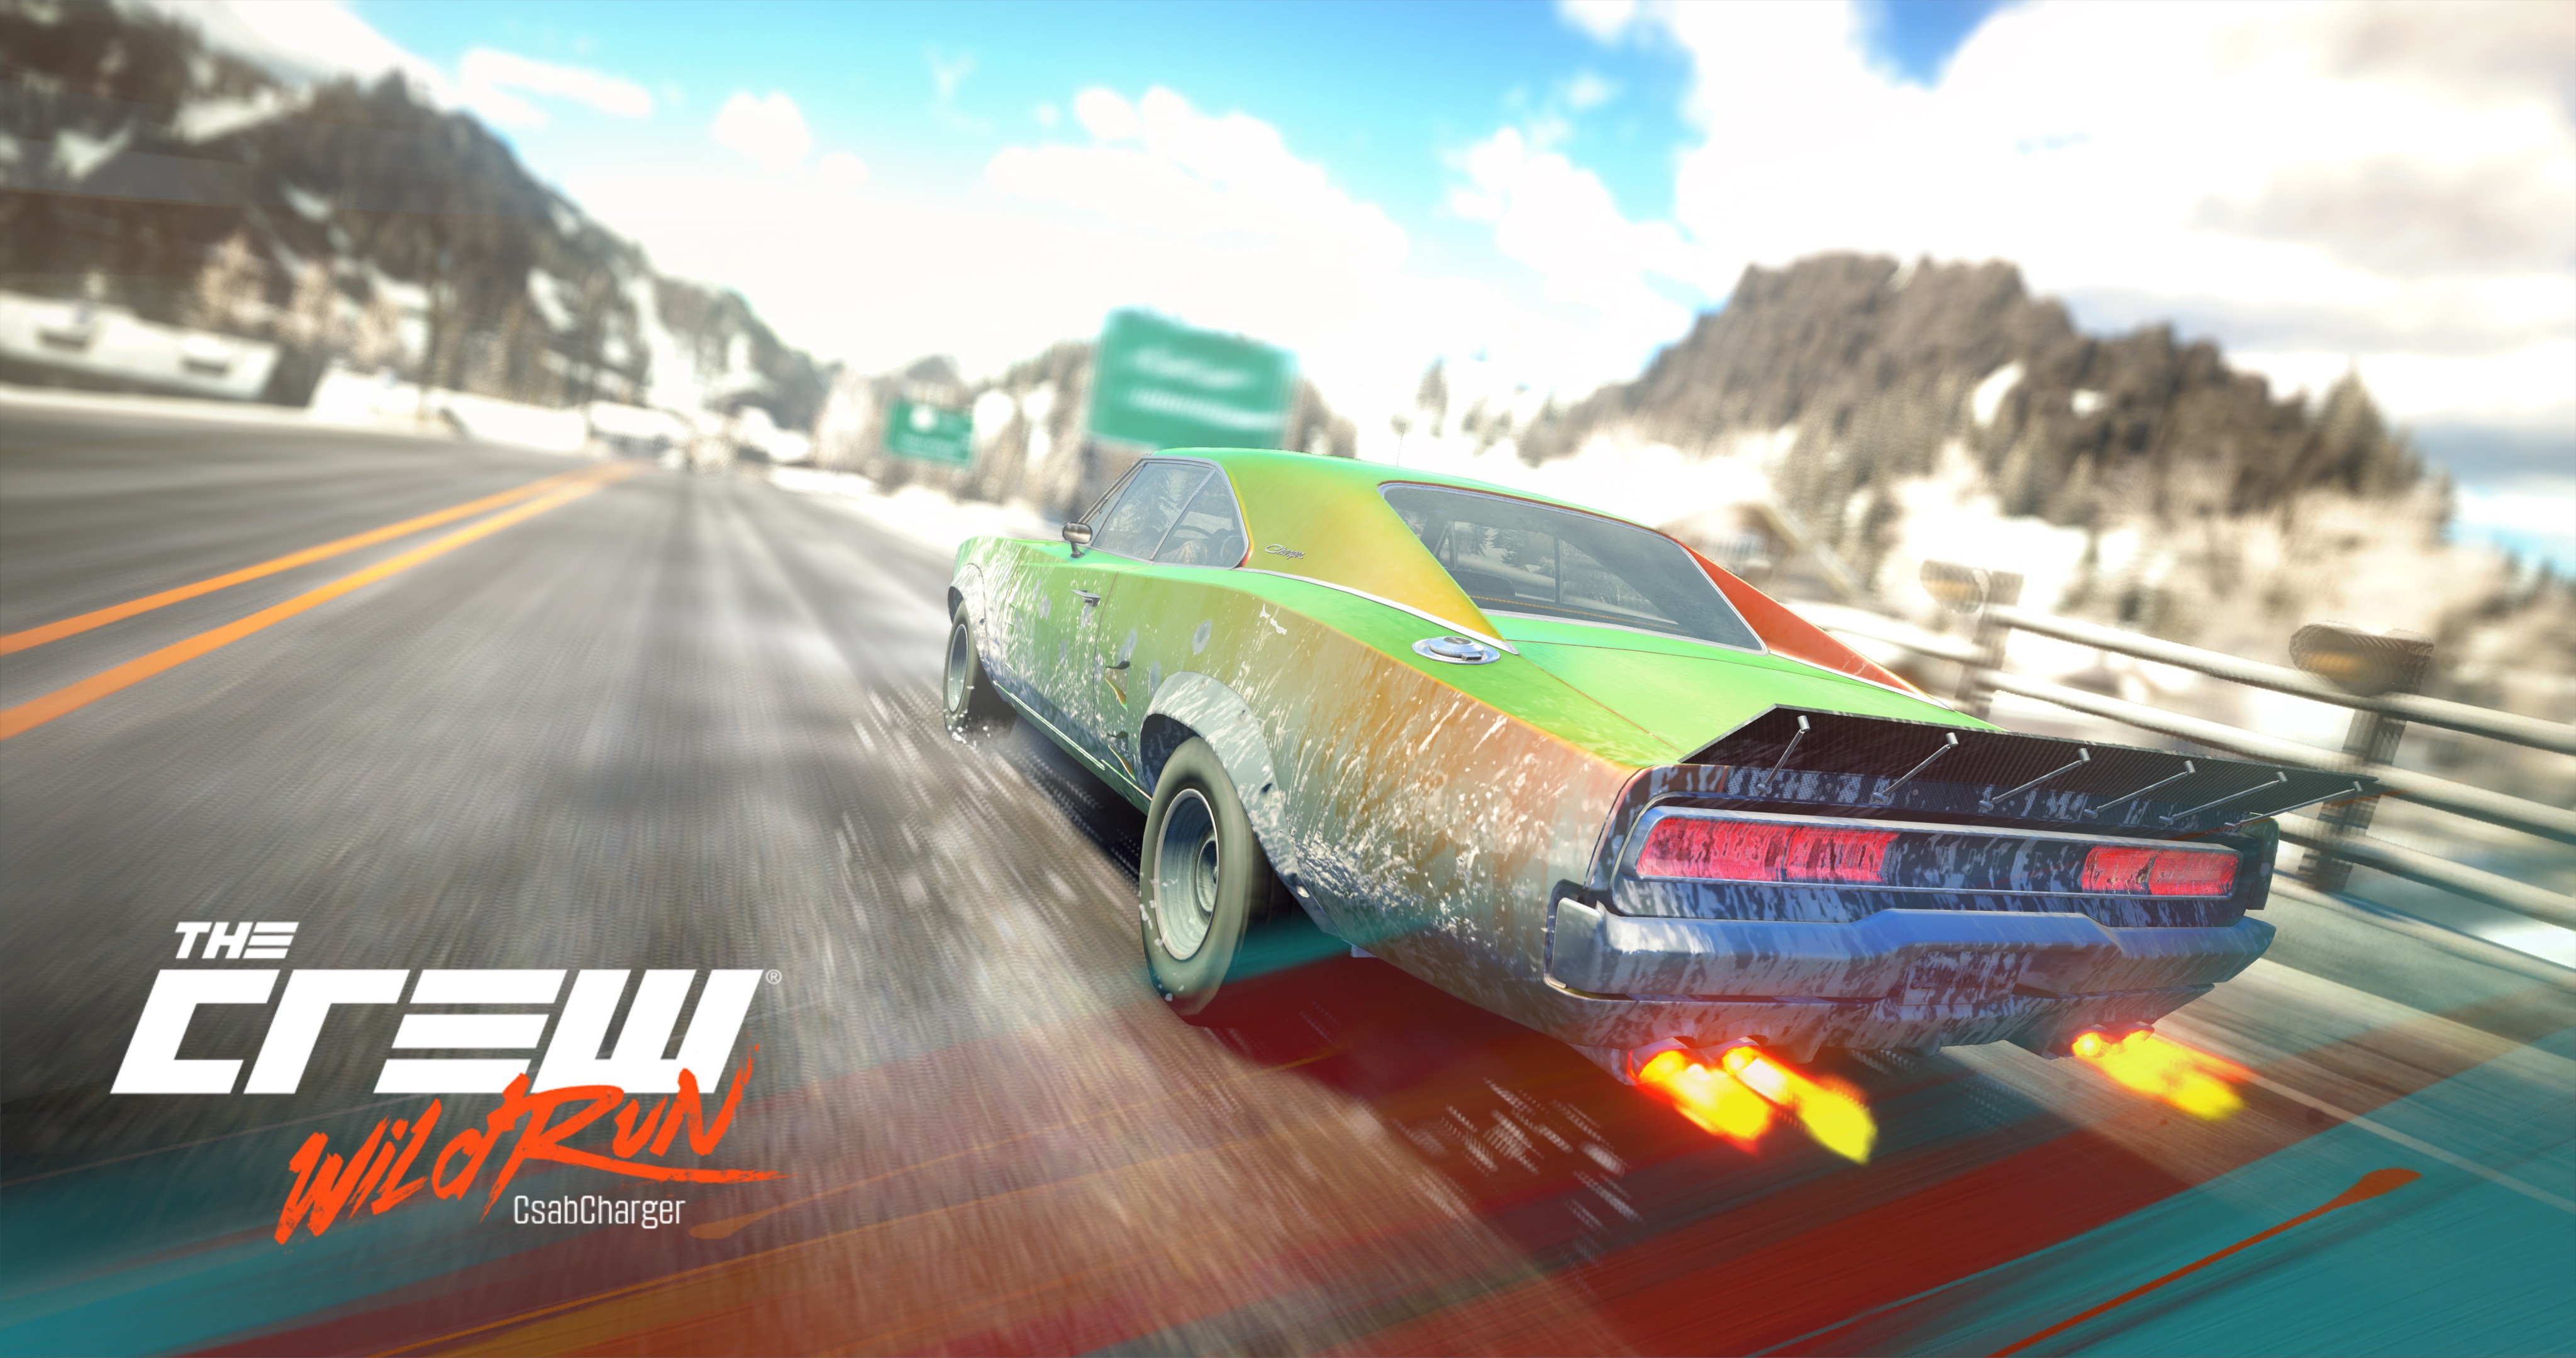 Dodge Charger R T 1968 The Crew The Crew Wild Run Race Cars 4096x2160